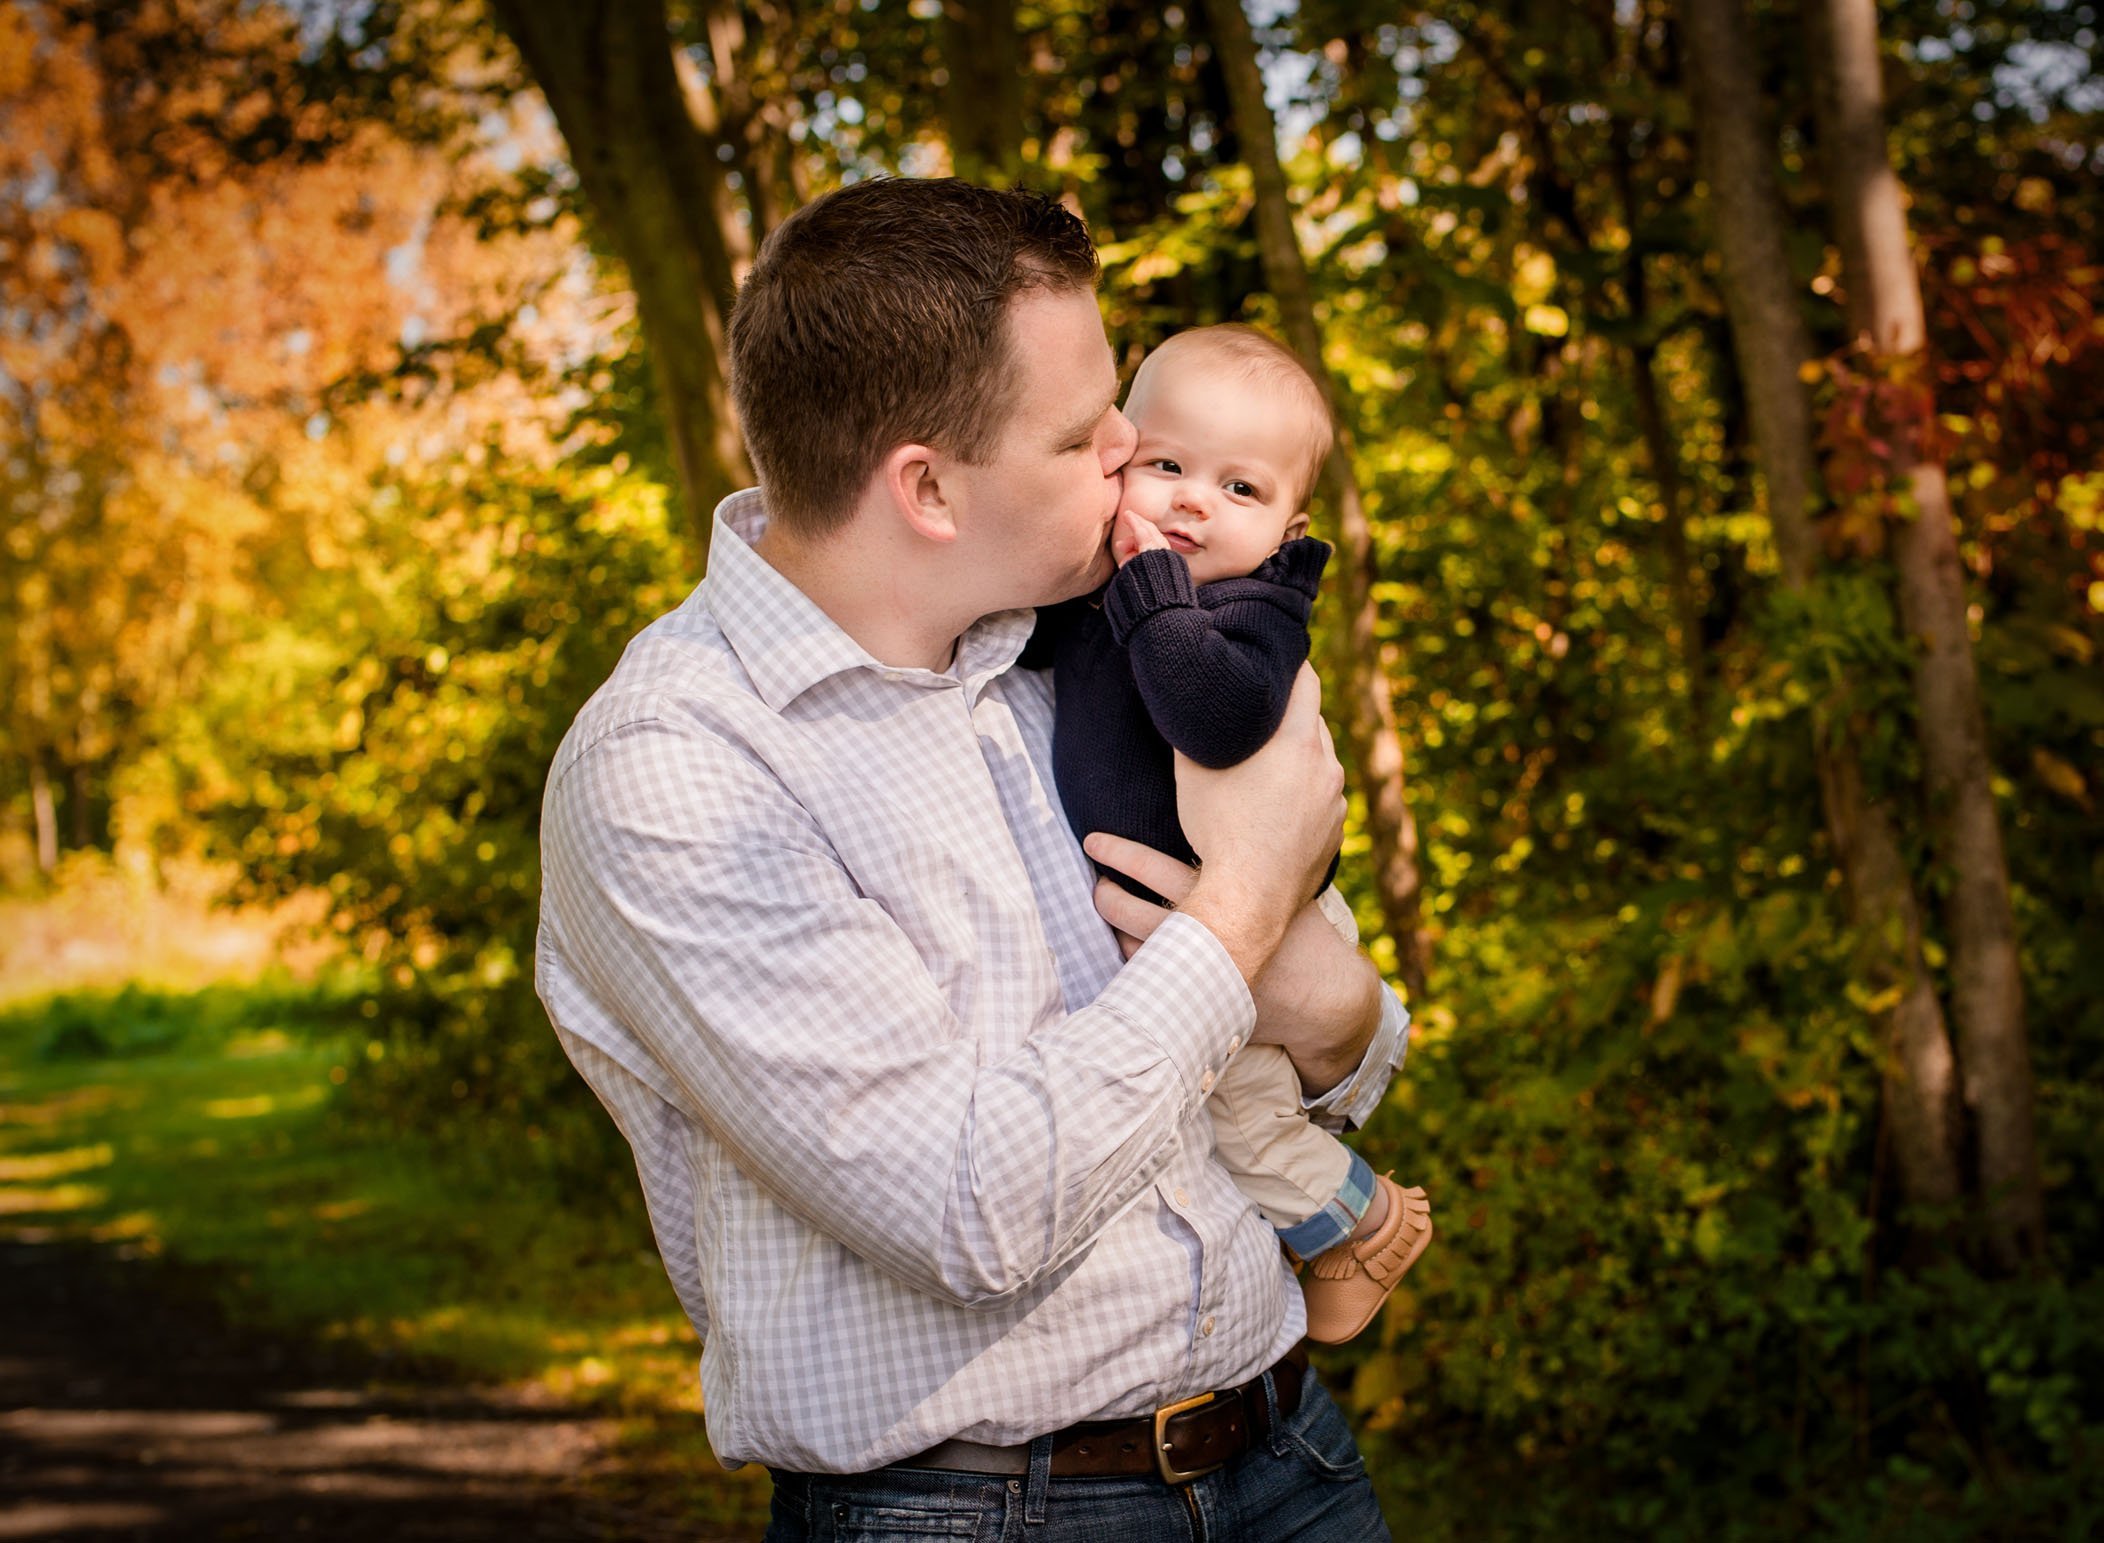 Dad kissing 6 month old son's cheek while holding him outside in fall